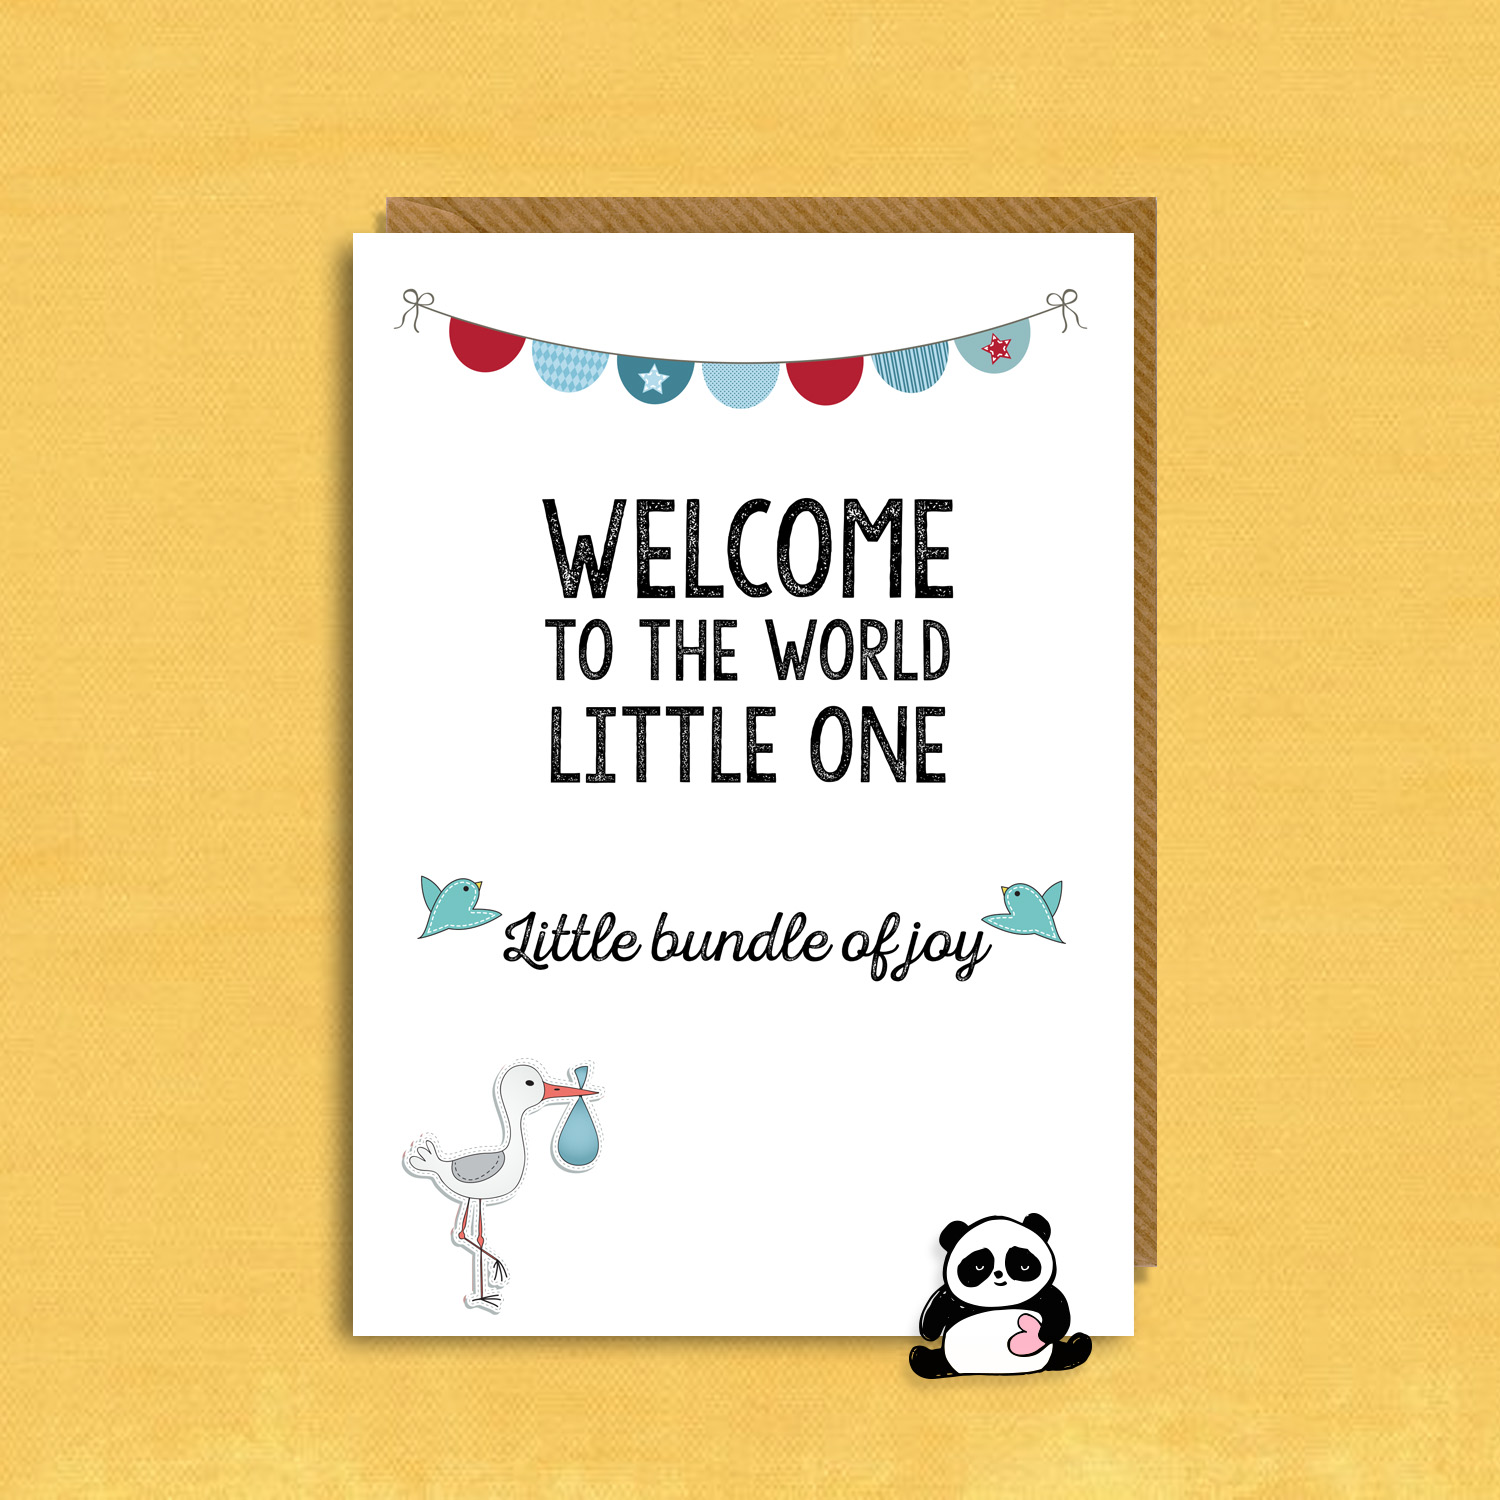 check out our super cool pregnancy, baby shower and new baby cards and add your own persoanlsied mesage inside